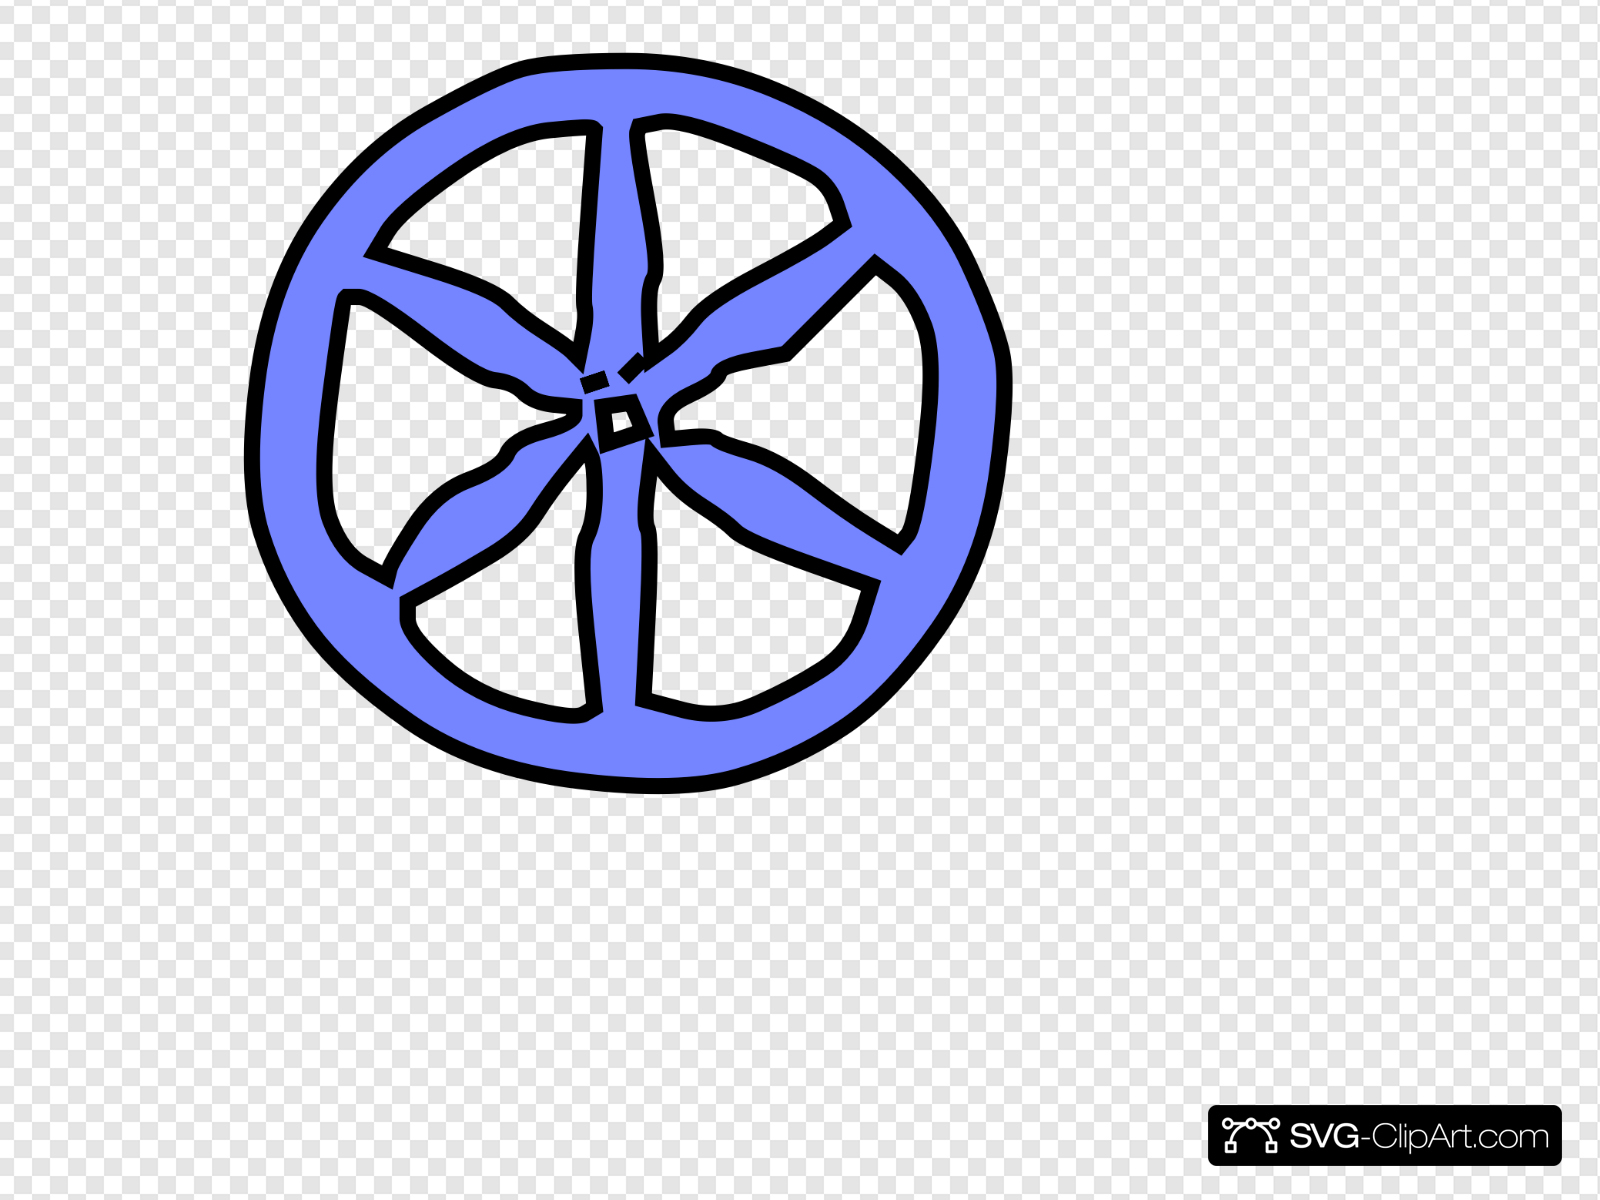 Blue Antique Wheel Clip art, Icon and SVG.